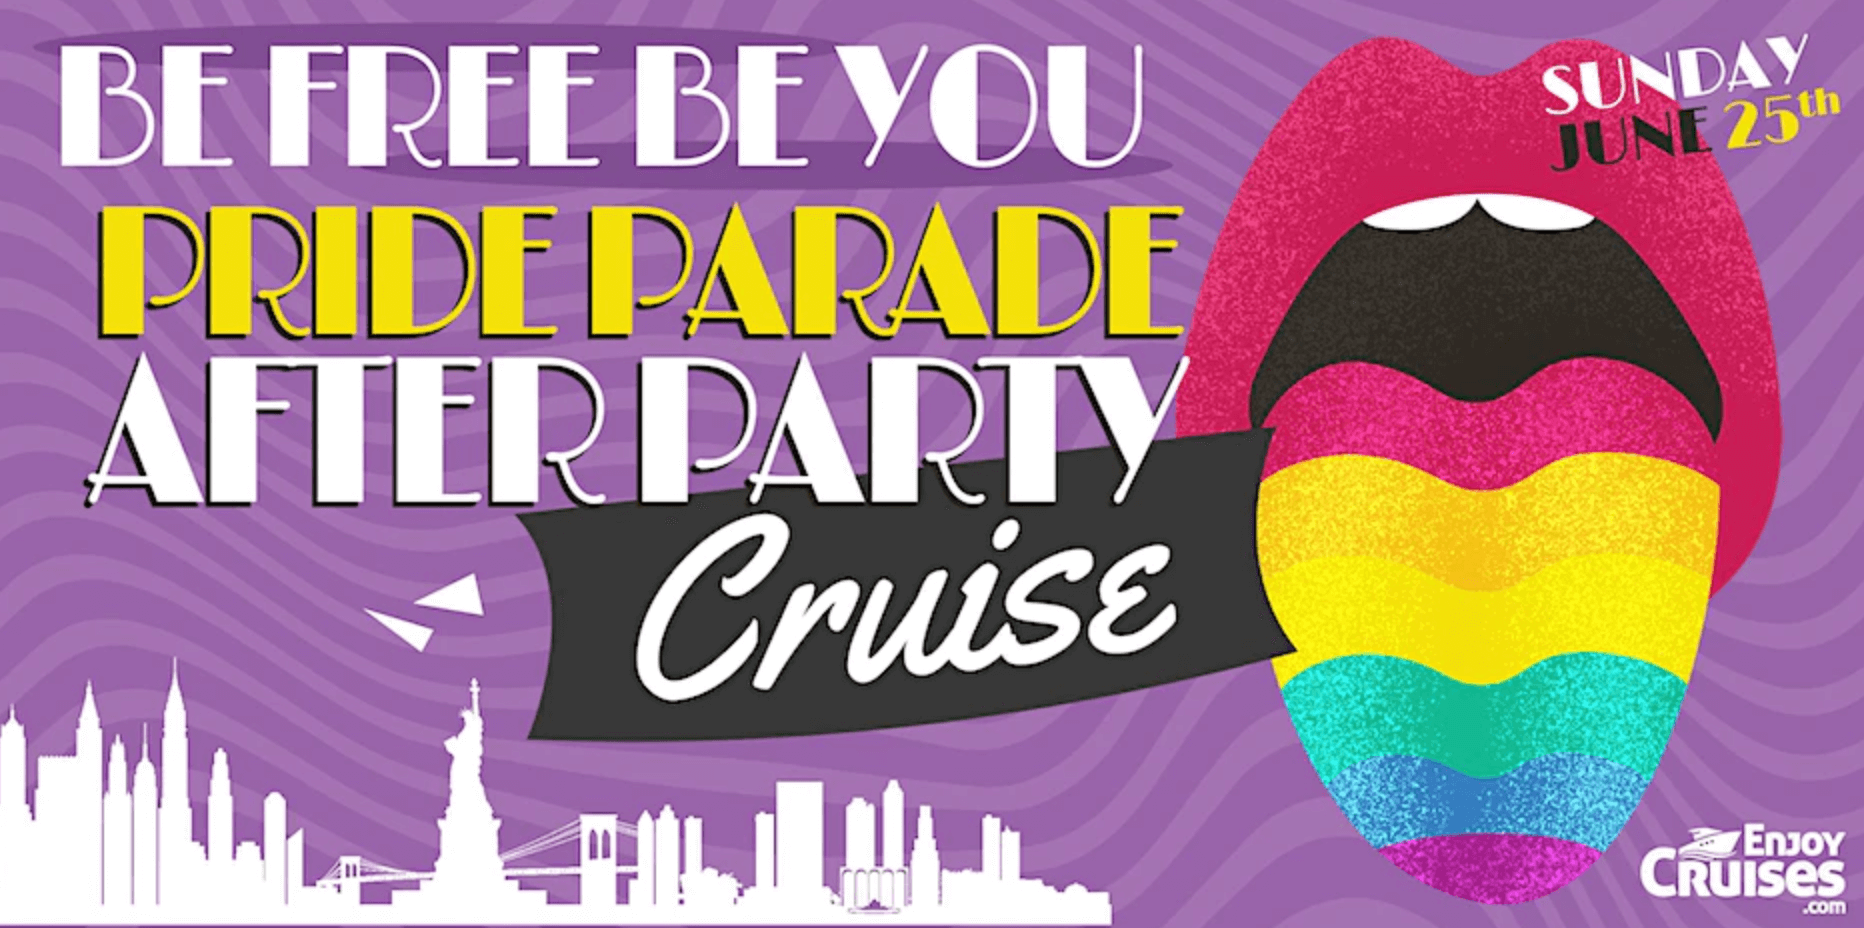 Be You Free, Be You - NYC Pride Parade After Party Cruise